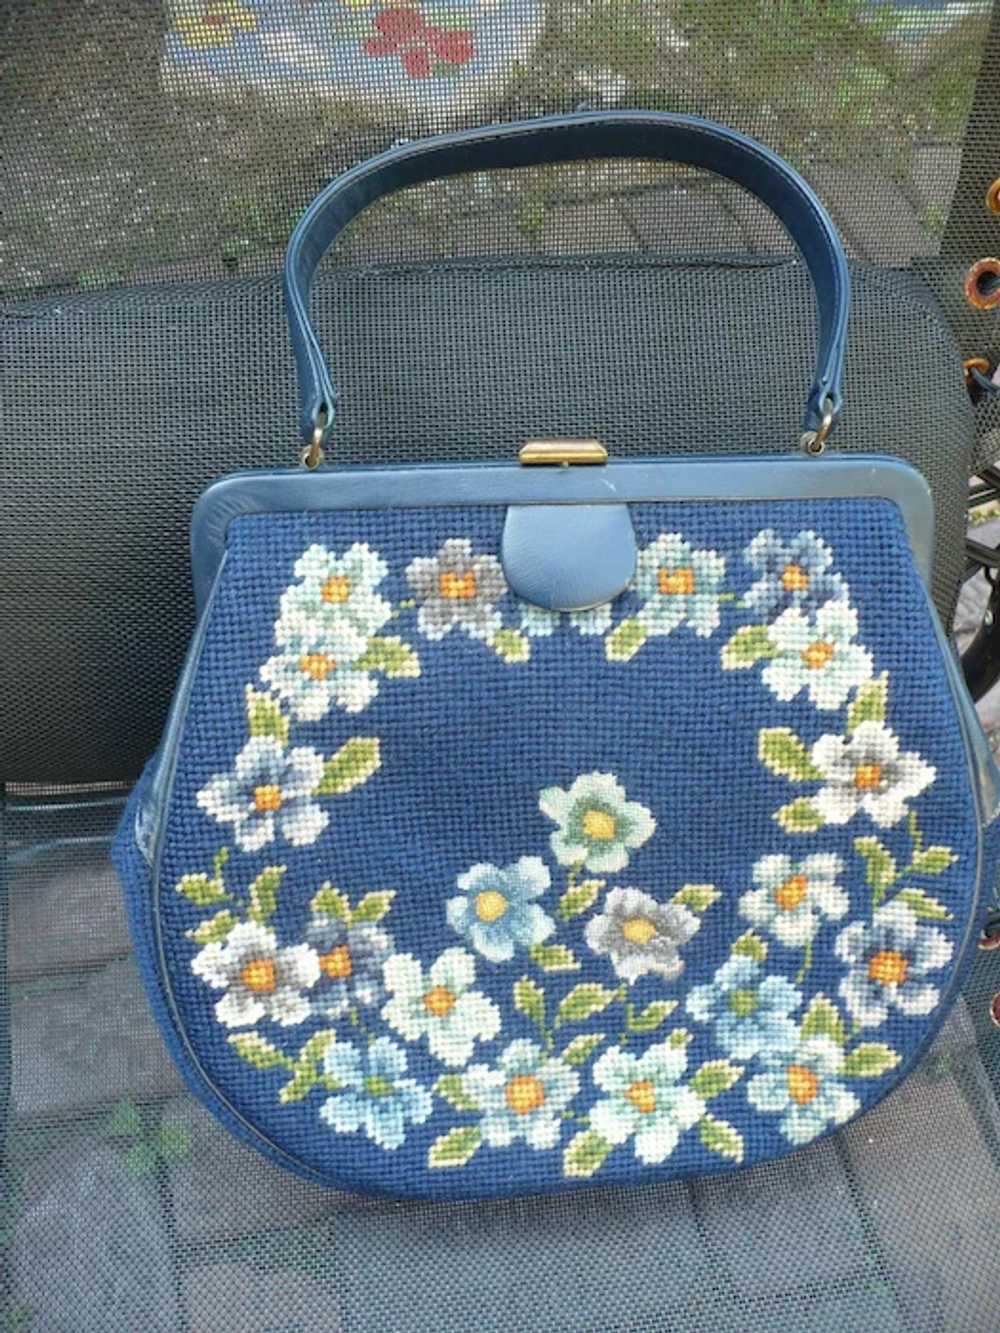 Floral Needlepoint Purse - image 4